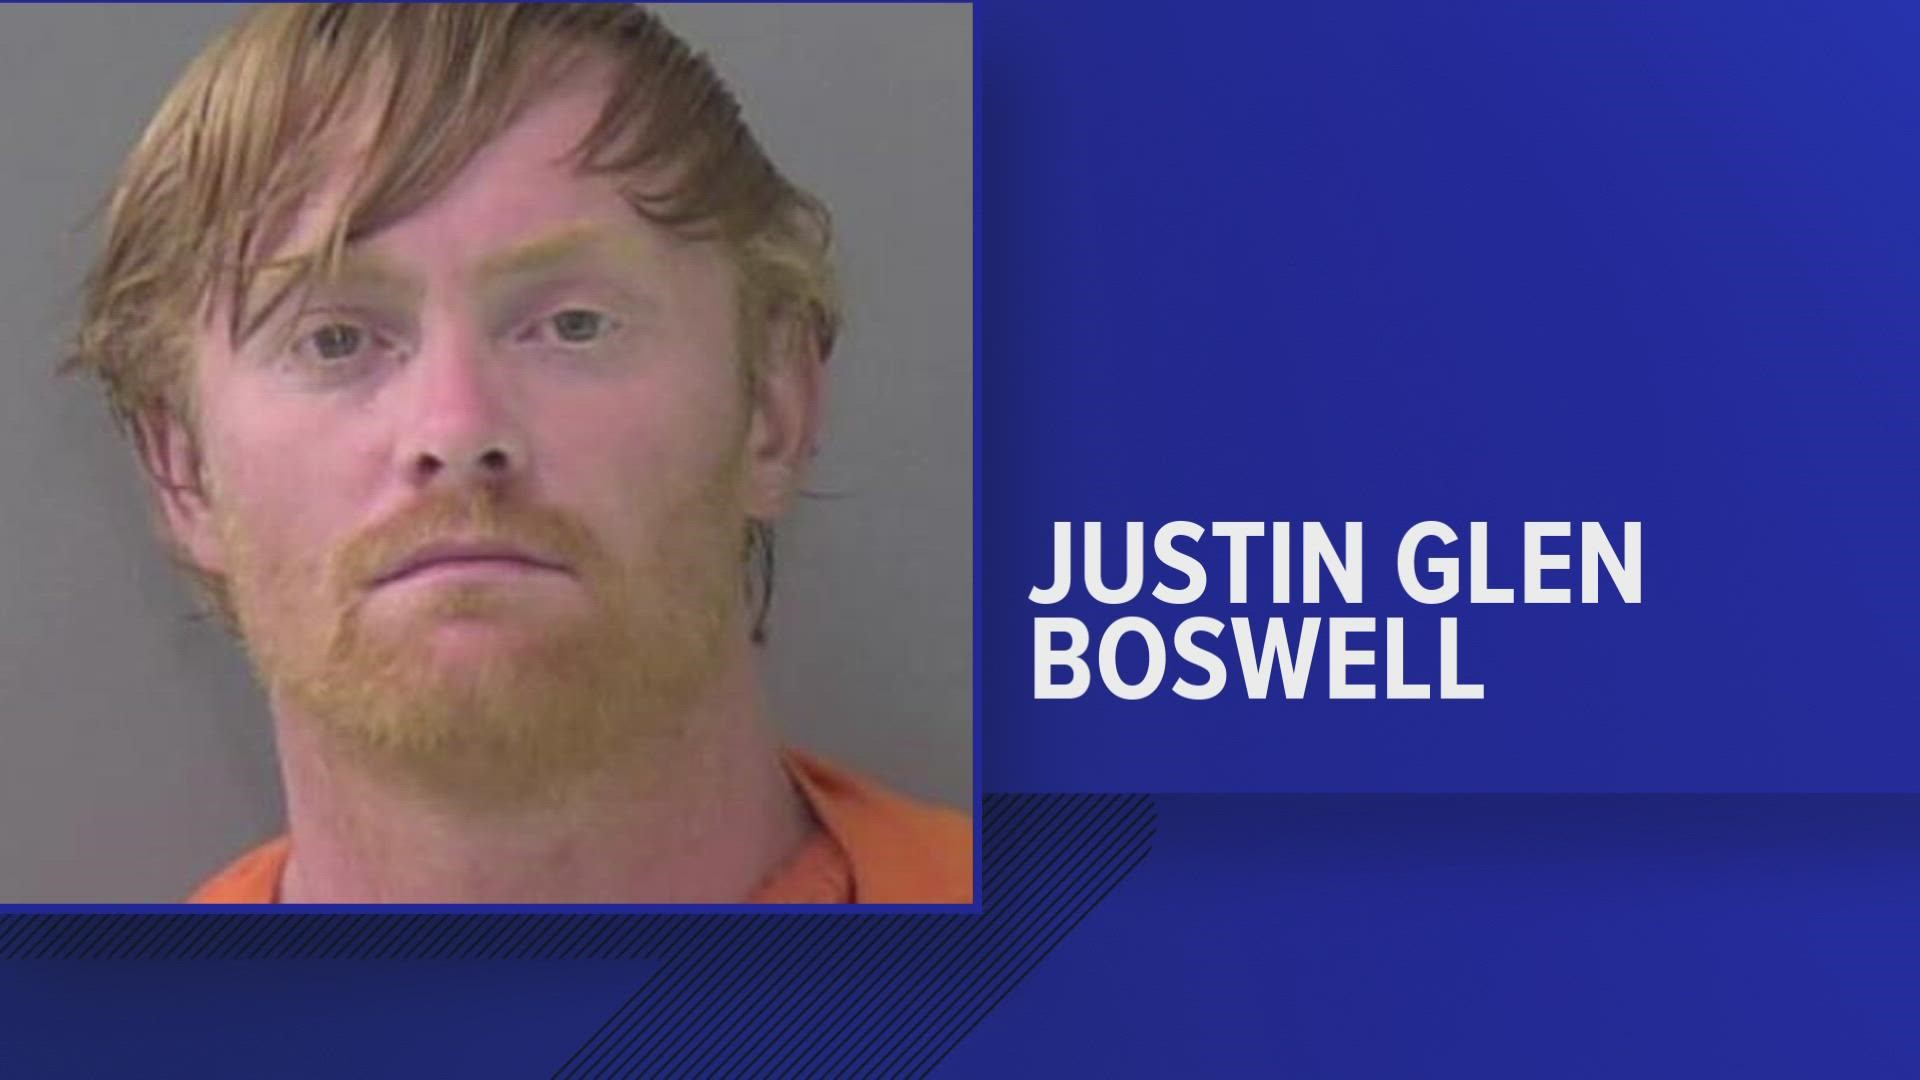 Justin Glenn Boswell was booked in Bell County jail on a murder charge, according to jail records.